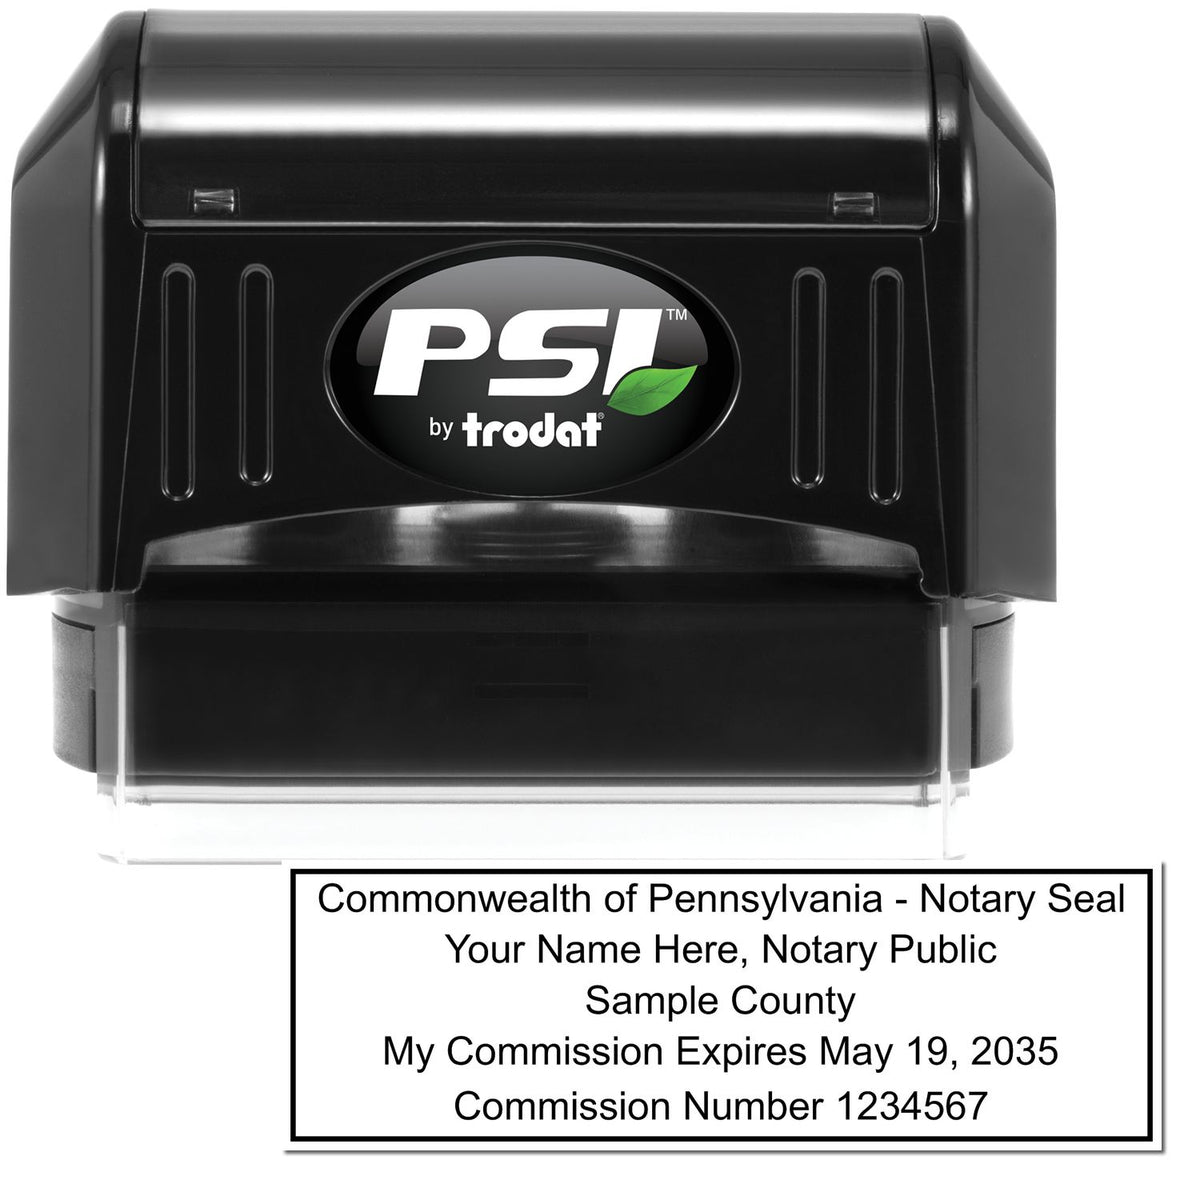 The main image for the PSI Pennsylvania Notary Stamp depicting a sample of the imprint and electronic files